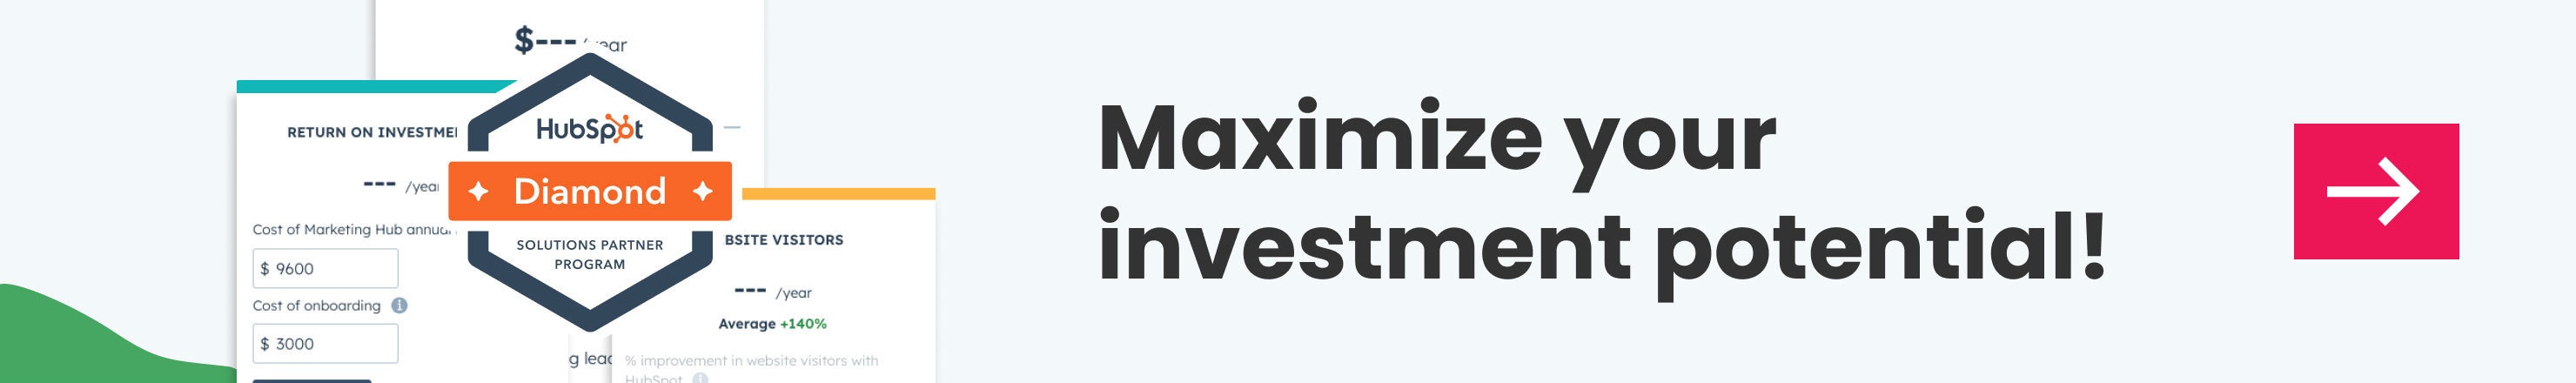 Maximize your investment potential!